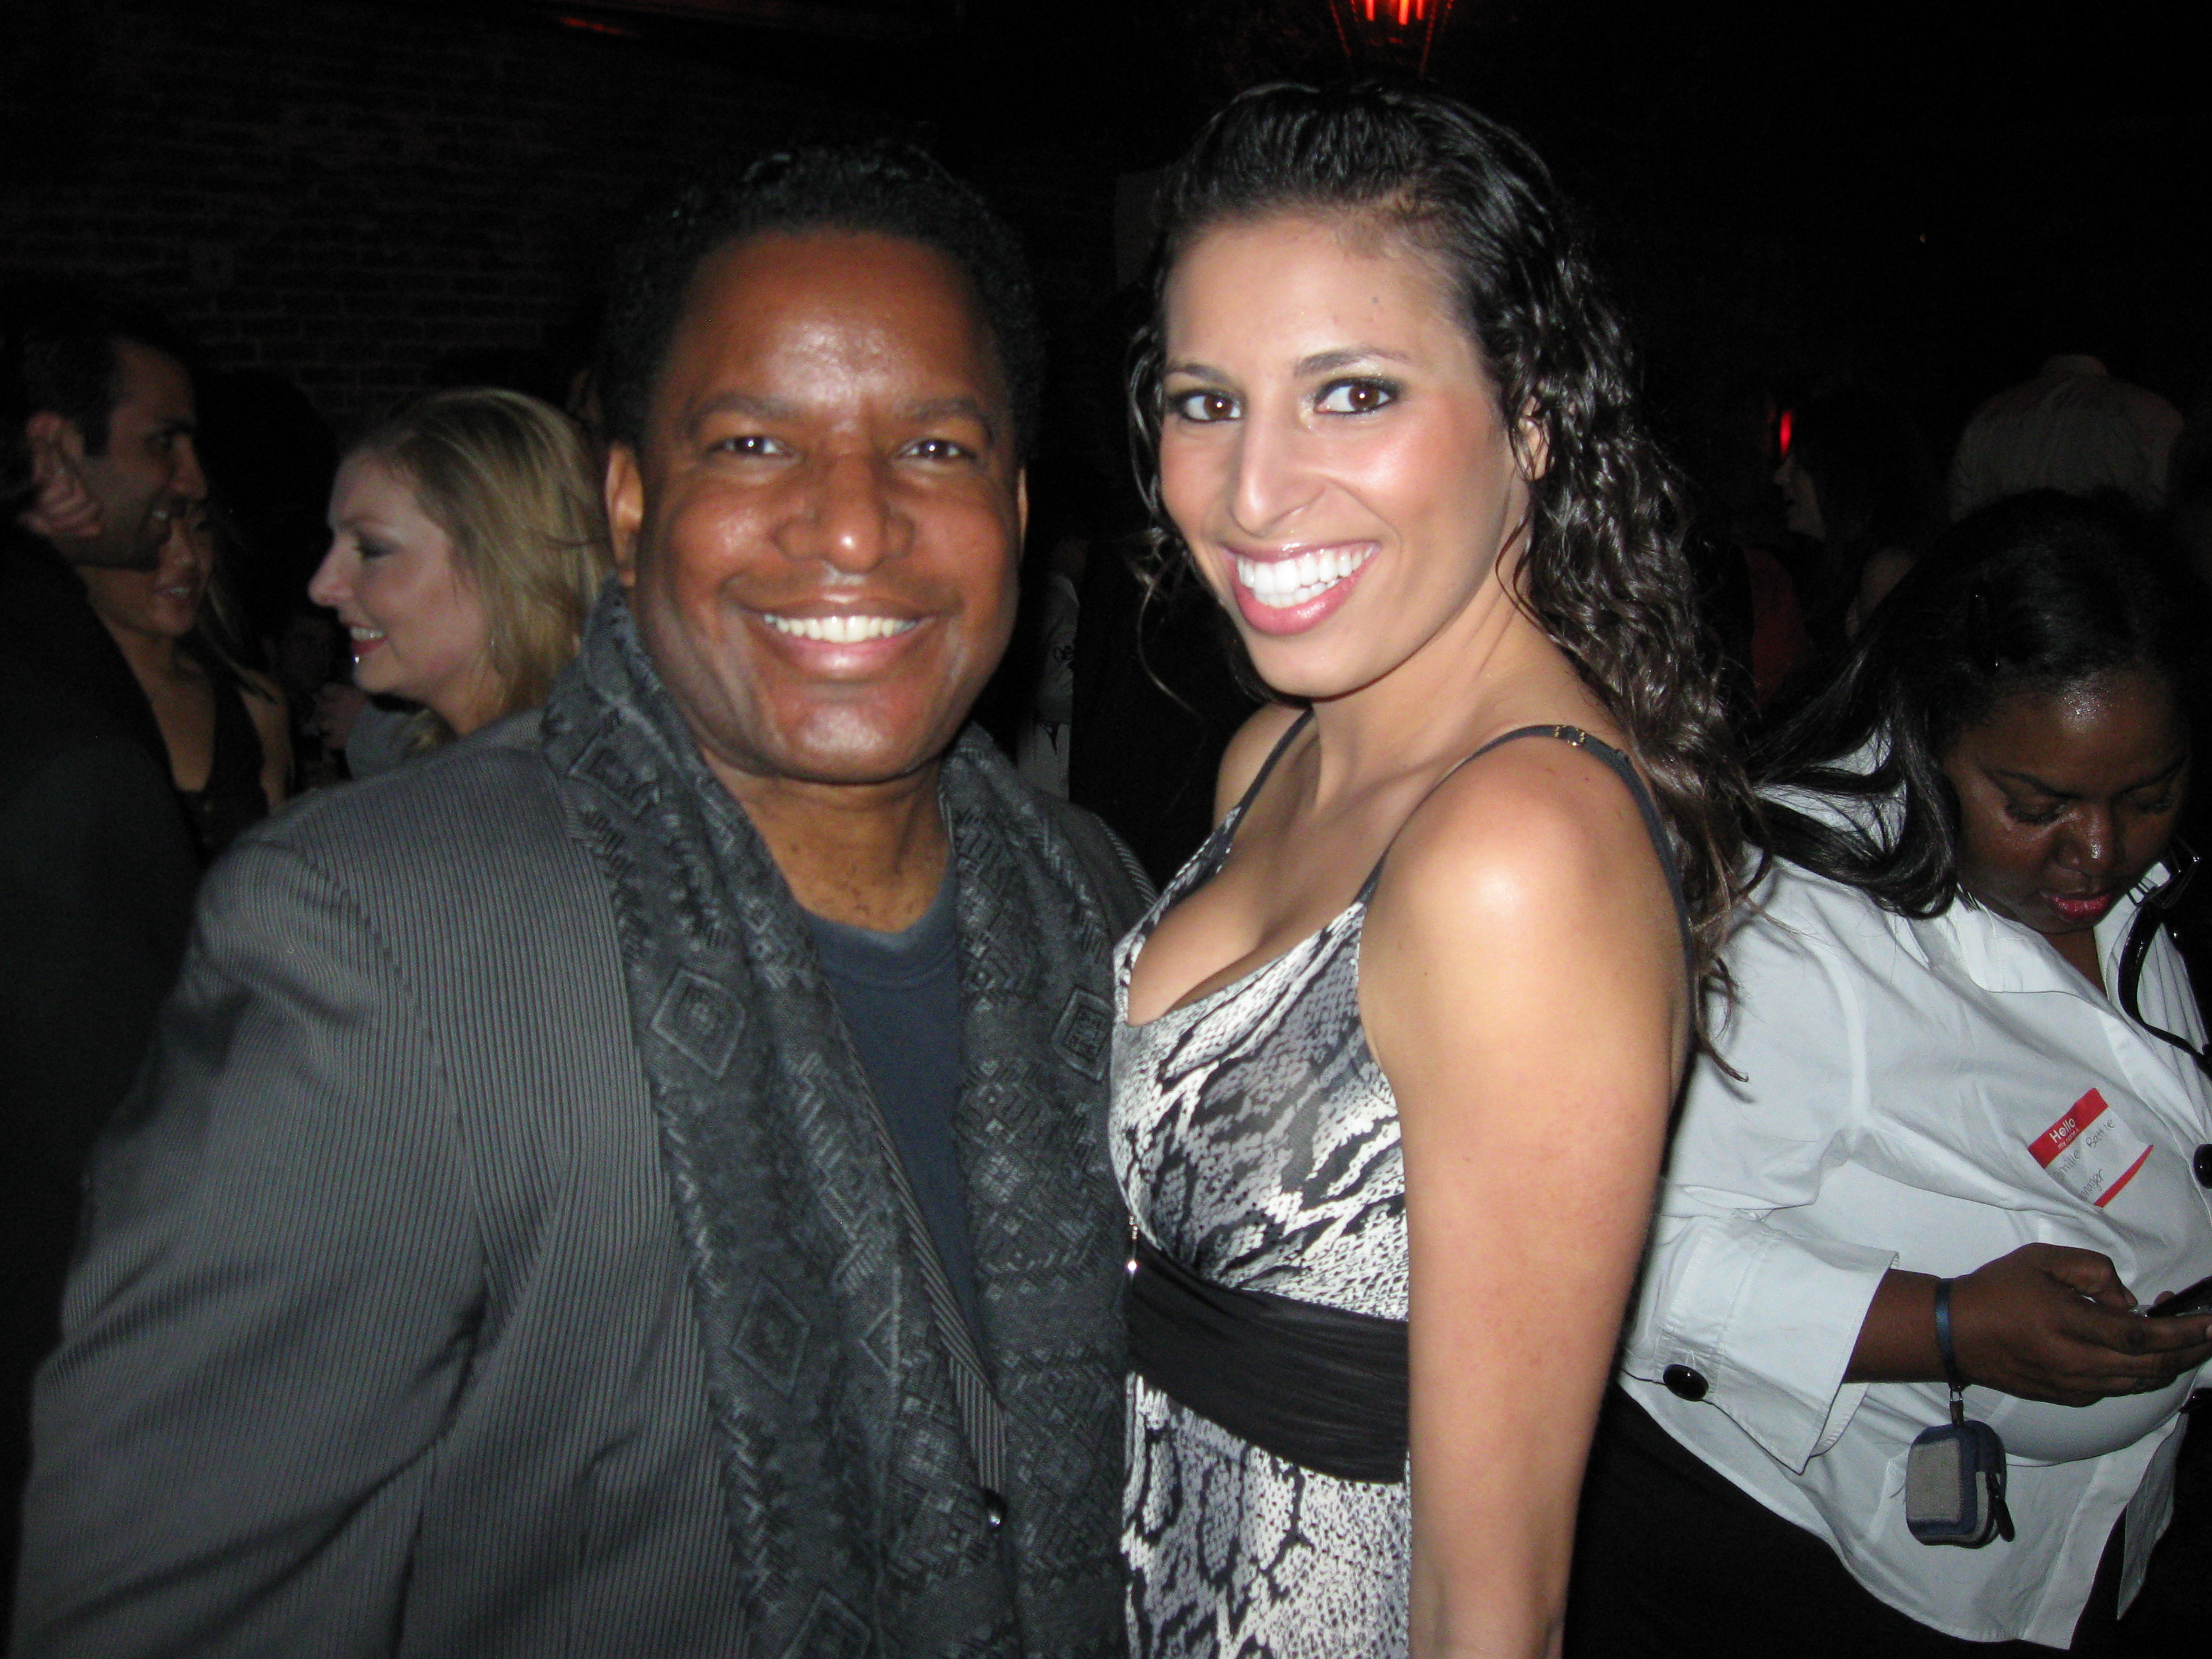 With Cleopatra Argyroudis at the 2010 Pre-Golden Globe Awards Party in West LA.